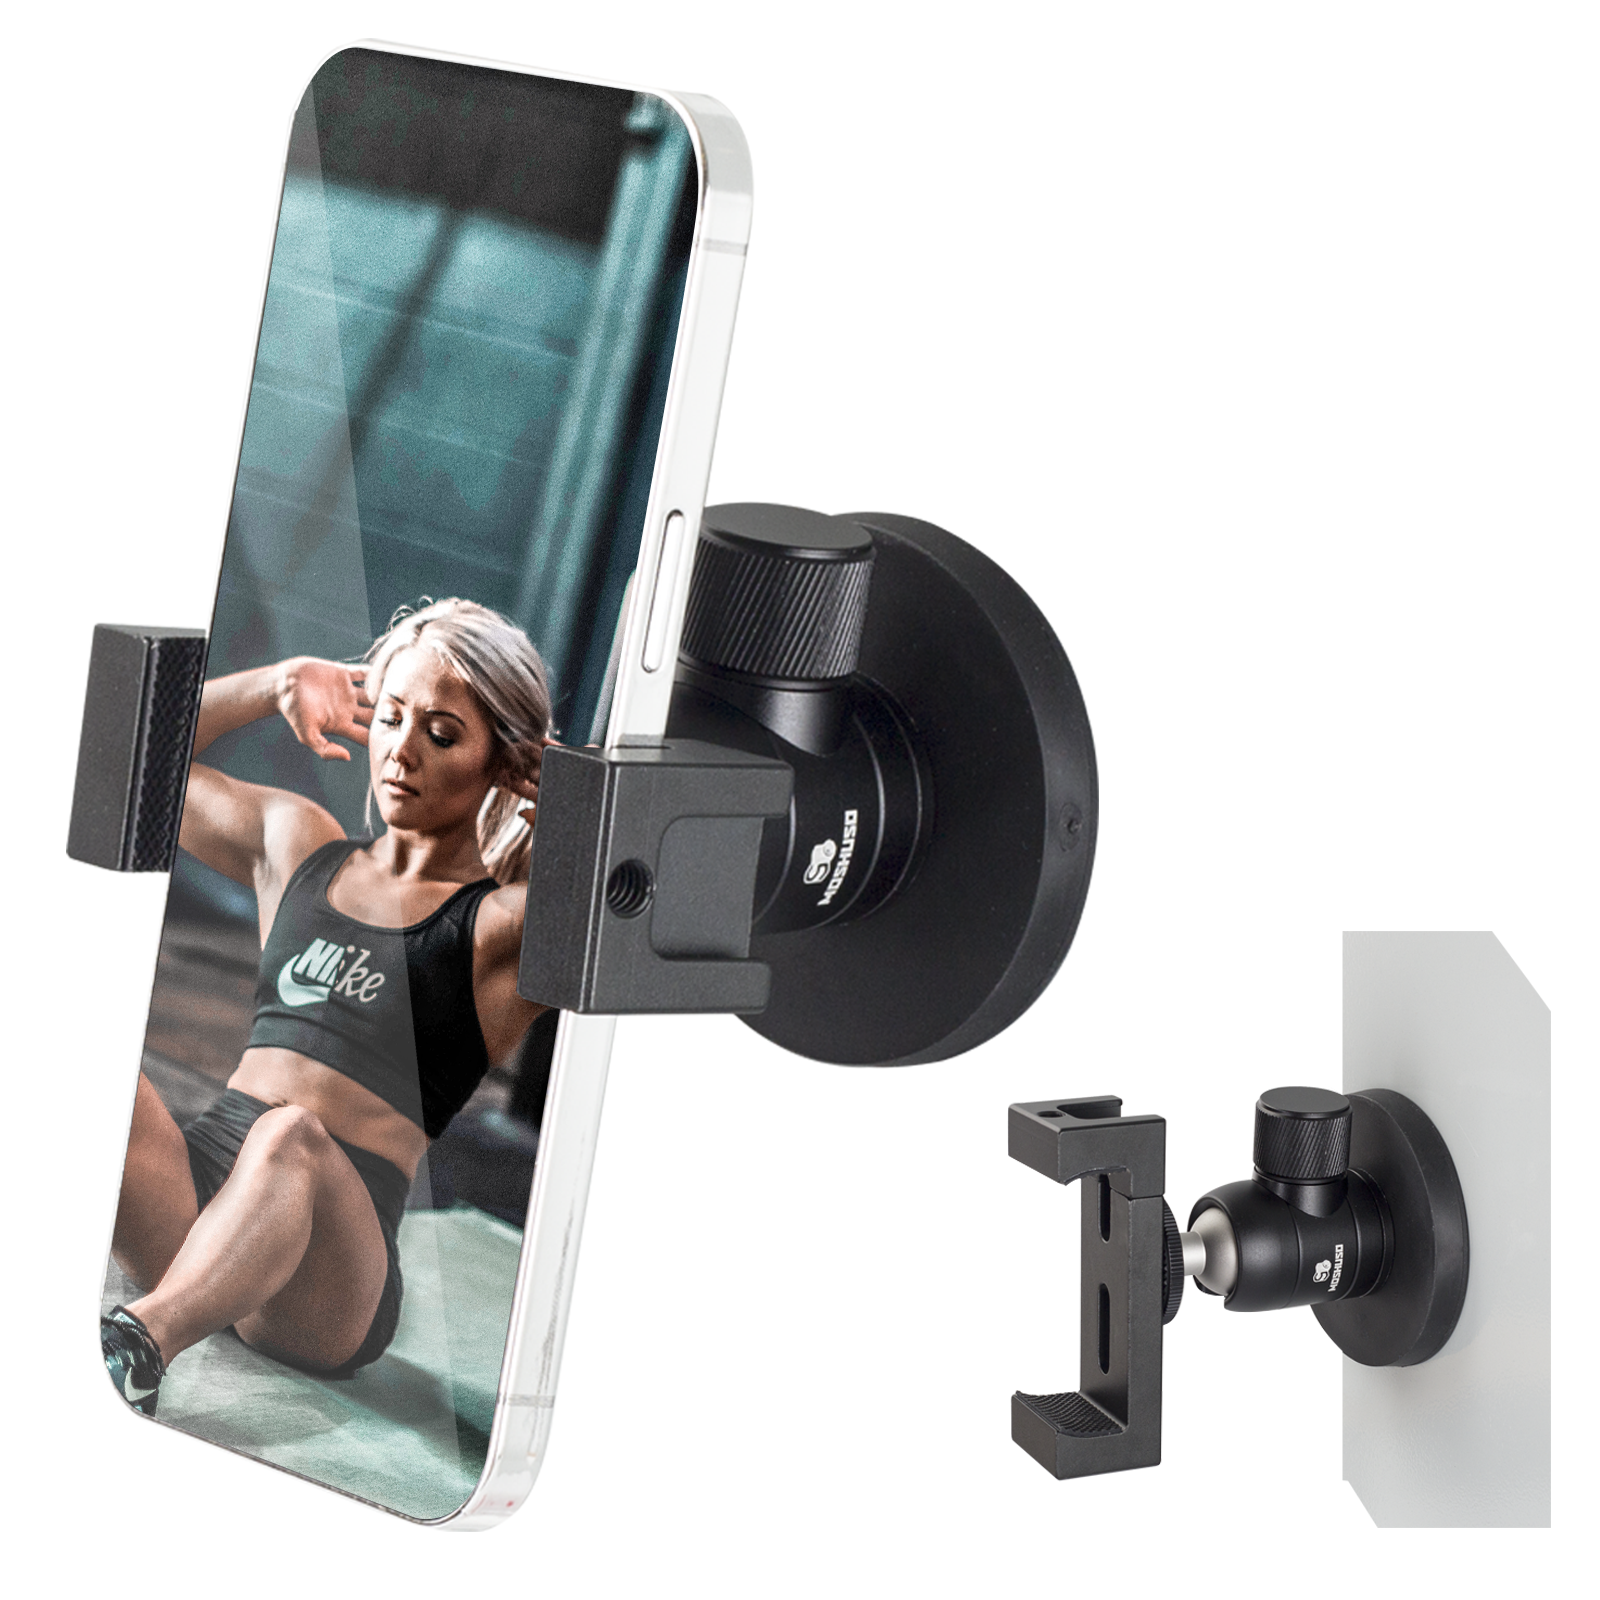 MOSHUSO PM66 Phone Magnetic Mount for Gym Sports Live Broadcast, Video Shooting